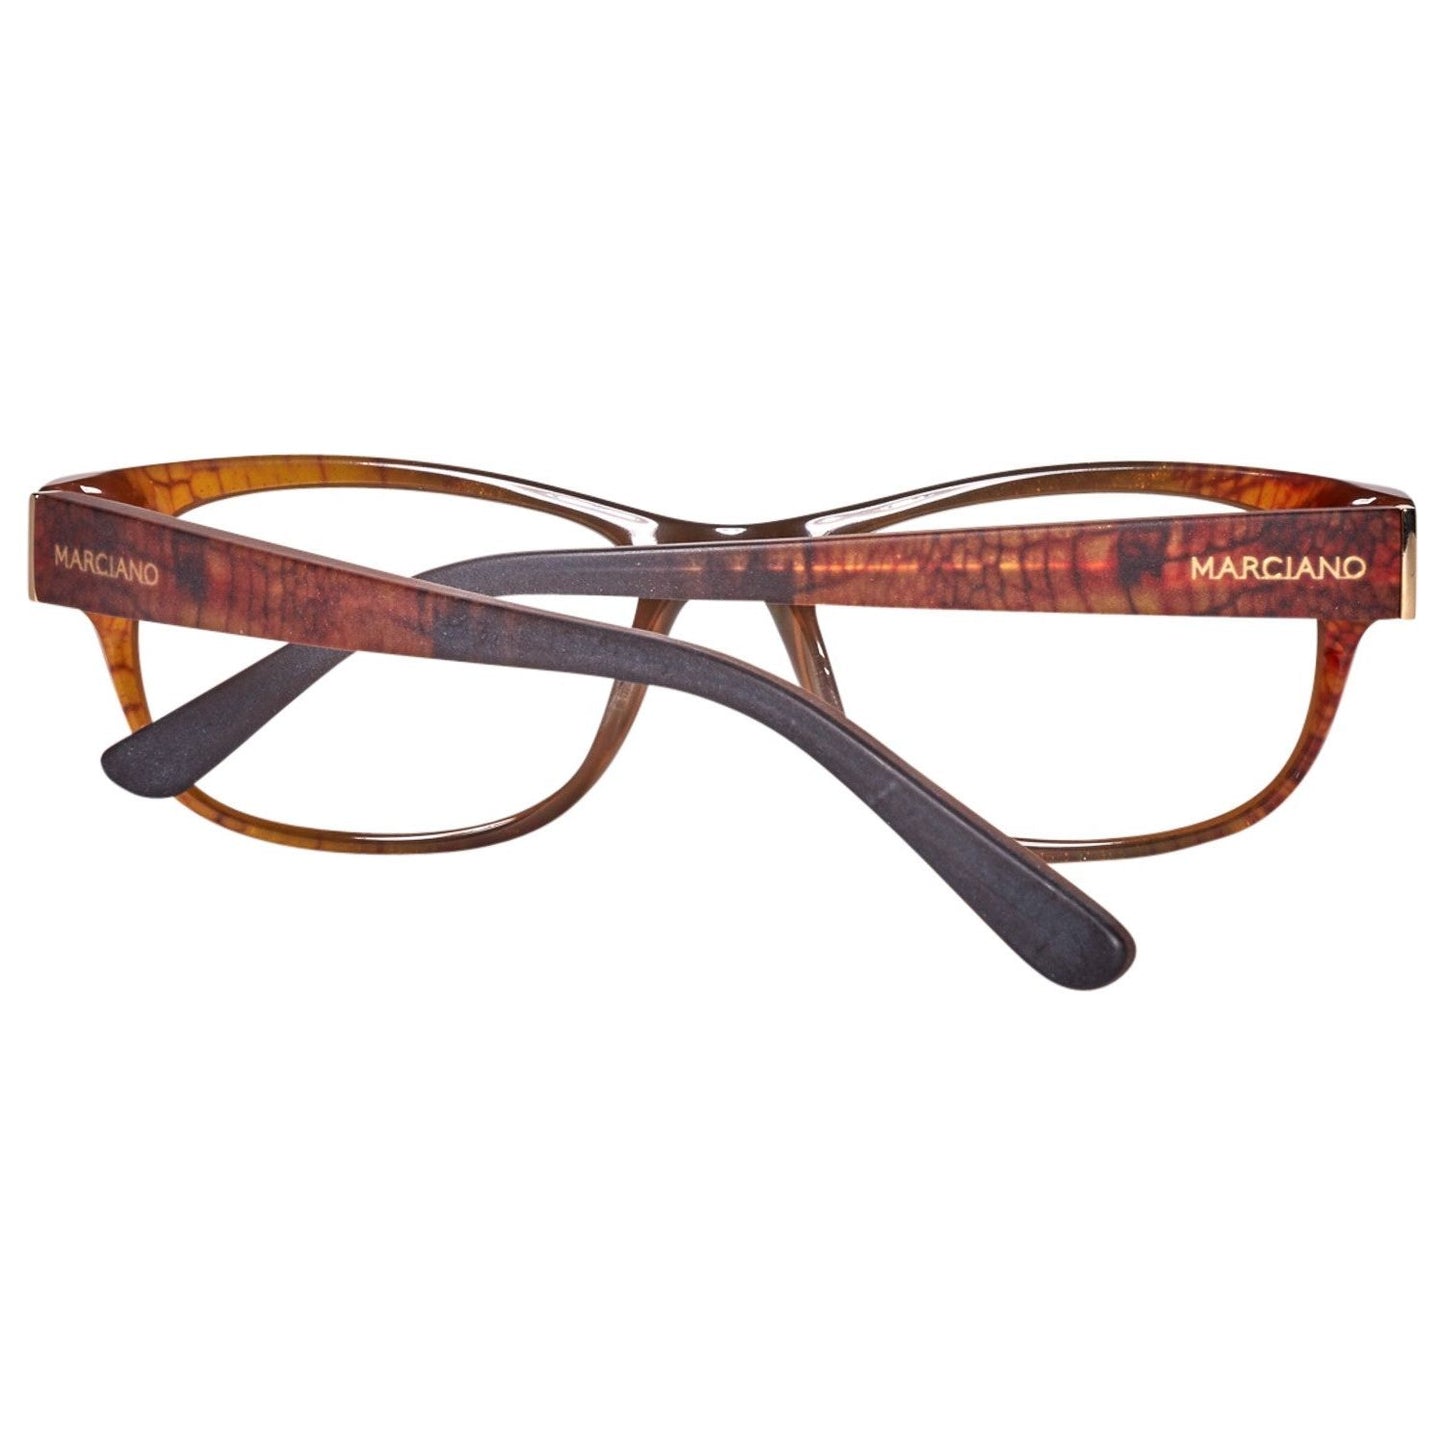 MARCIANO By GUESS EYEWEAR MARCIANO BY GUESS MOD. GM0261 53050 SUNGLASSES & EYEWEAR marciano-by-guess-mod-gm0261-53050